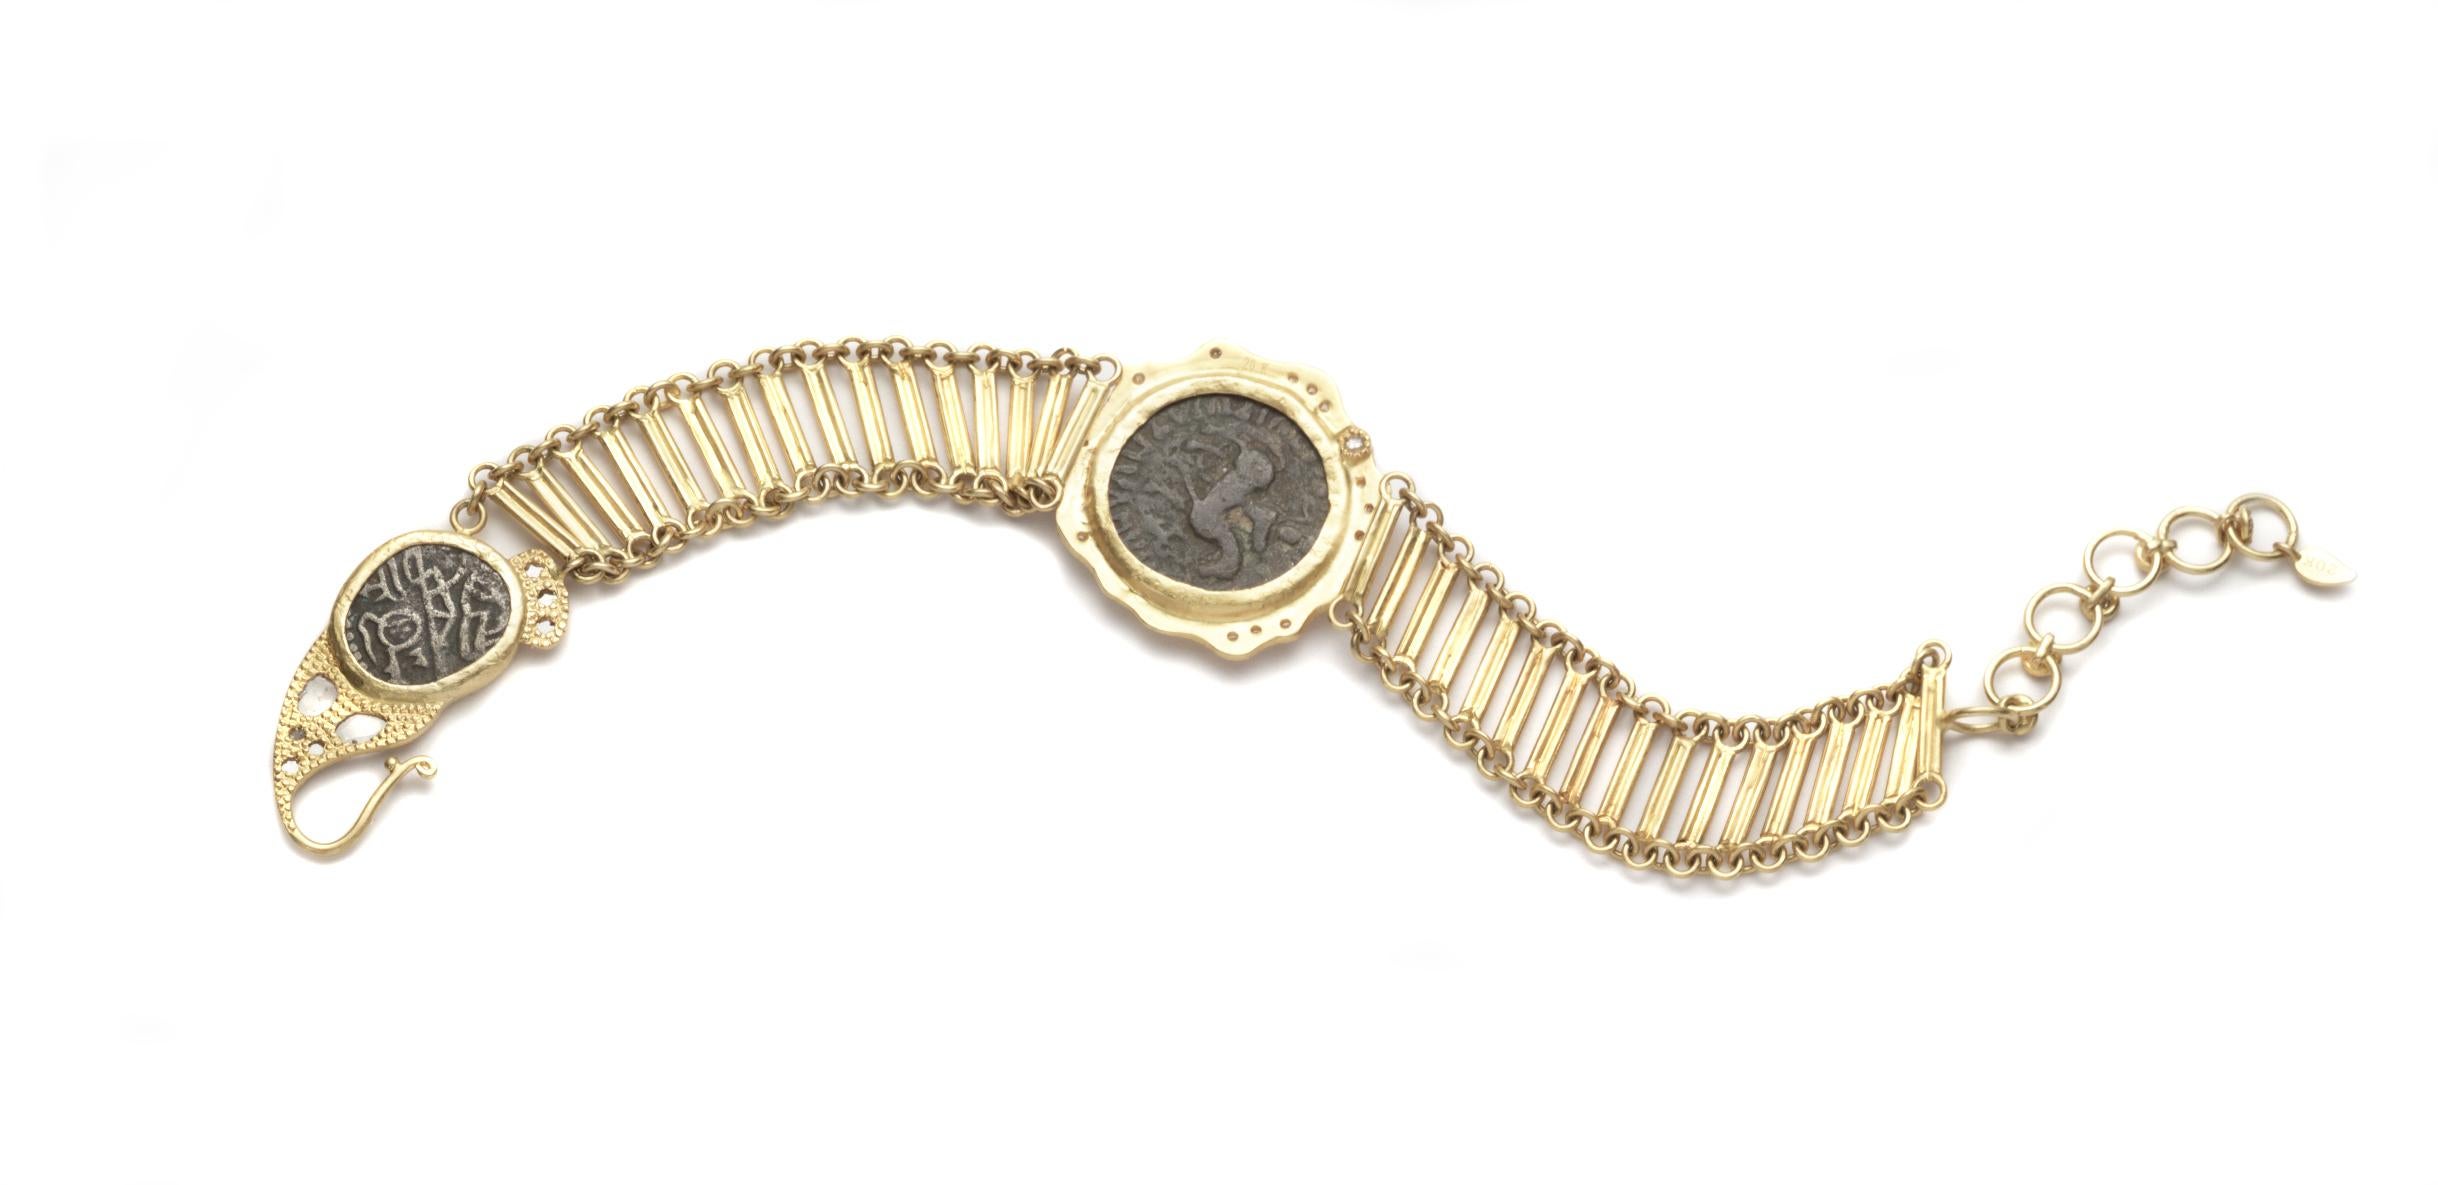 Hand made Coomi bracelet set in 20K yellow gold with two Indo-Greek ancient coins at center and clasp, ladder design band, and 0.67cts brilliant and flat diamond accents.

Bracelet measures 8 inches in length with 1 inch extender.